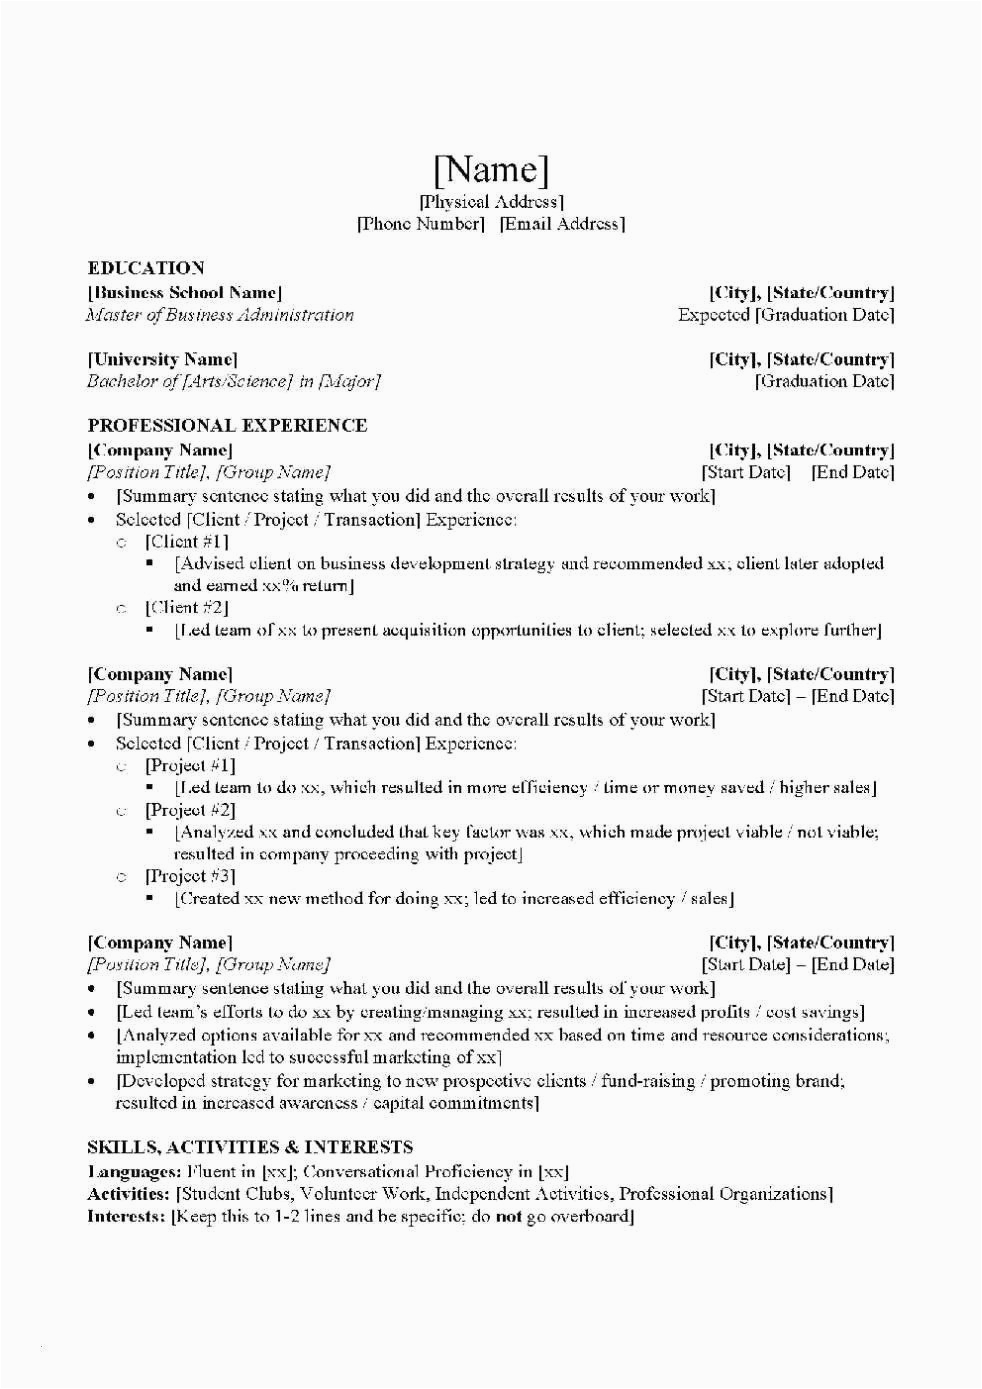 Sample Resume for Mba College Admission Mba Application Resume Examples Best 12 Mba Application